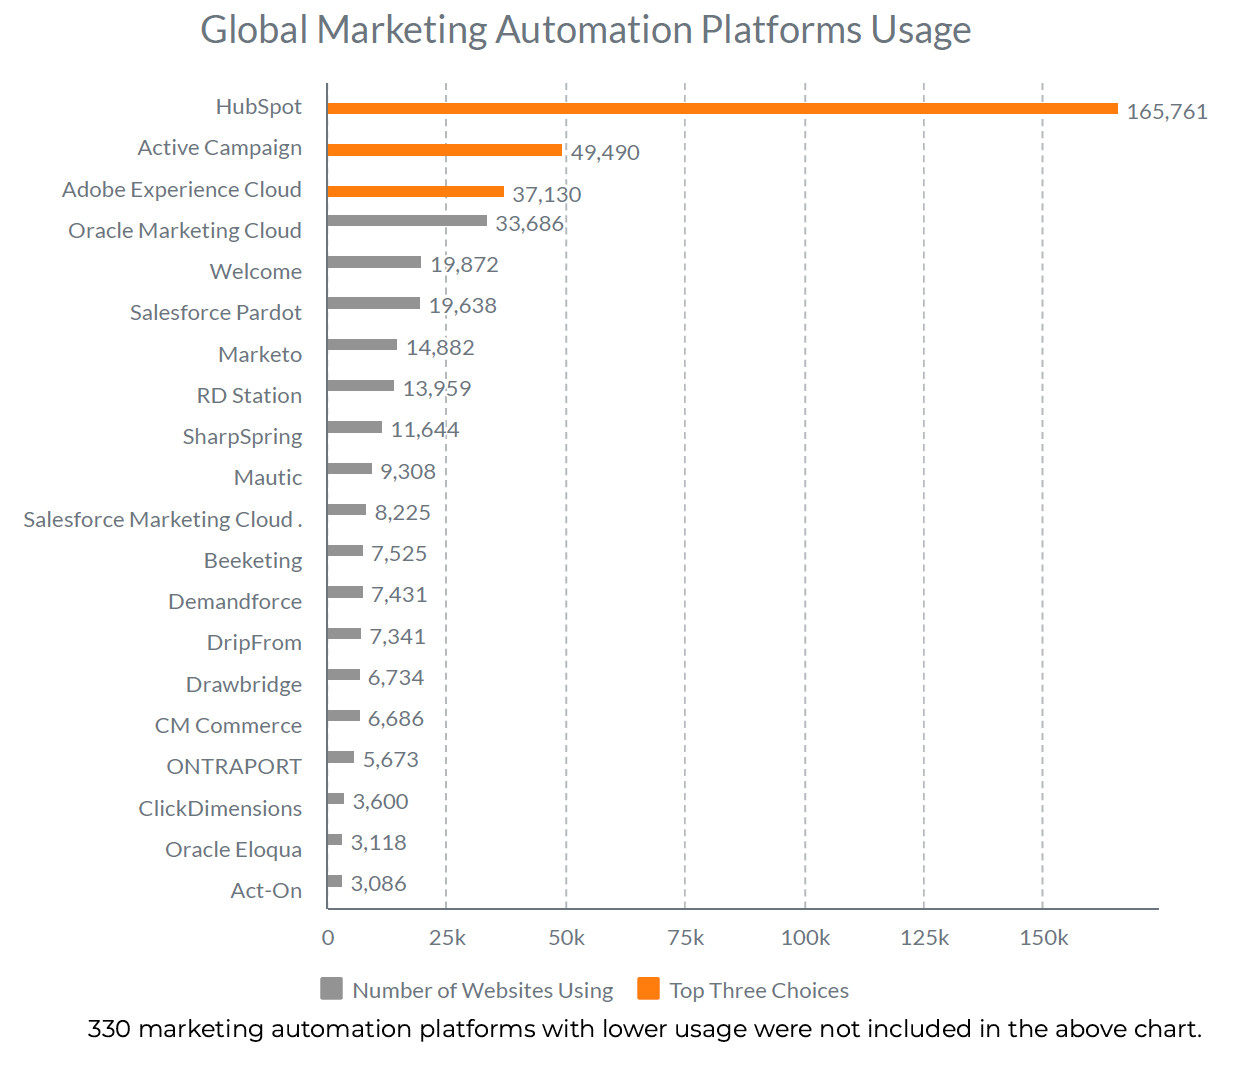 buildops marketing trends marketing automation usage global